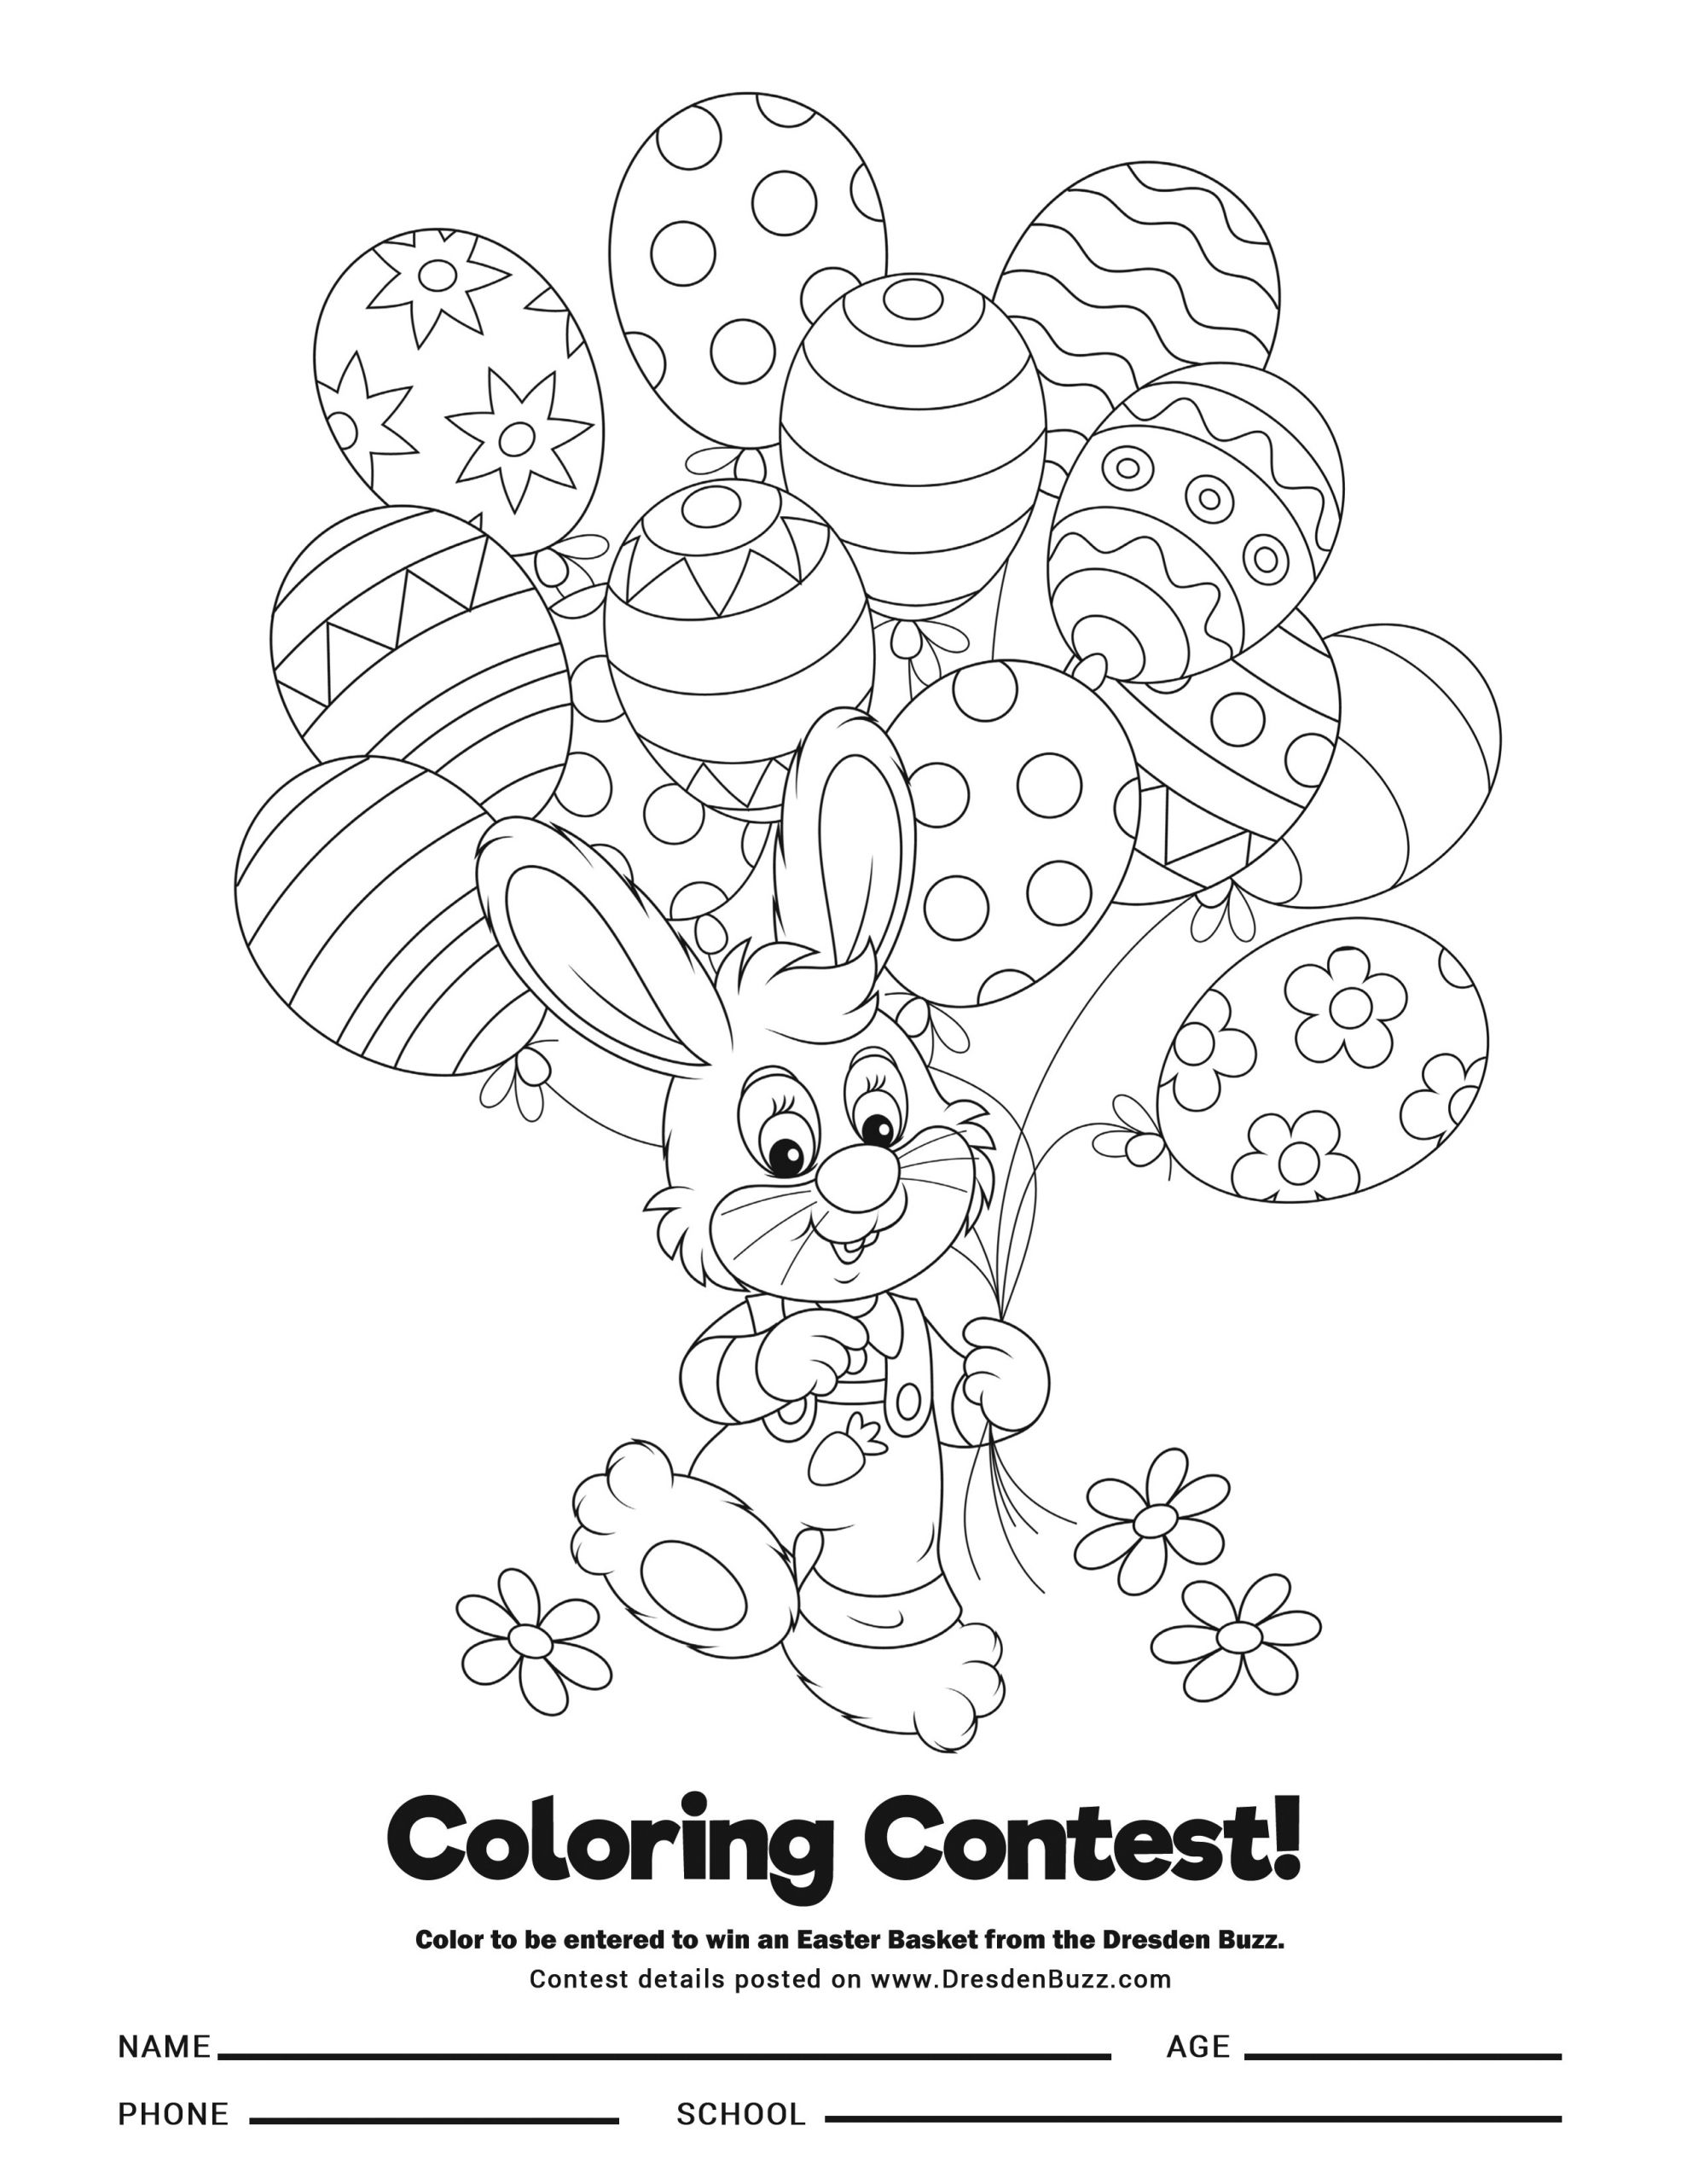 Kids Coloring Contest
 Hey Kids Don’t For to Enter the Coloring Contest